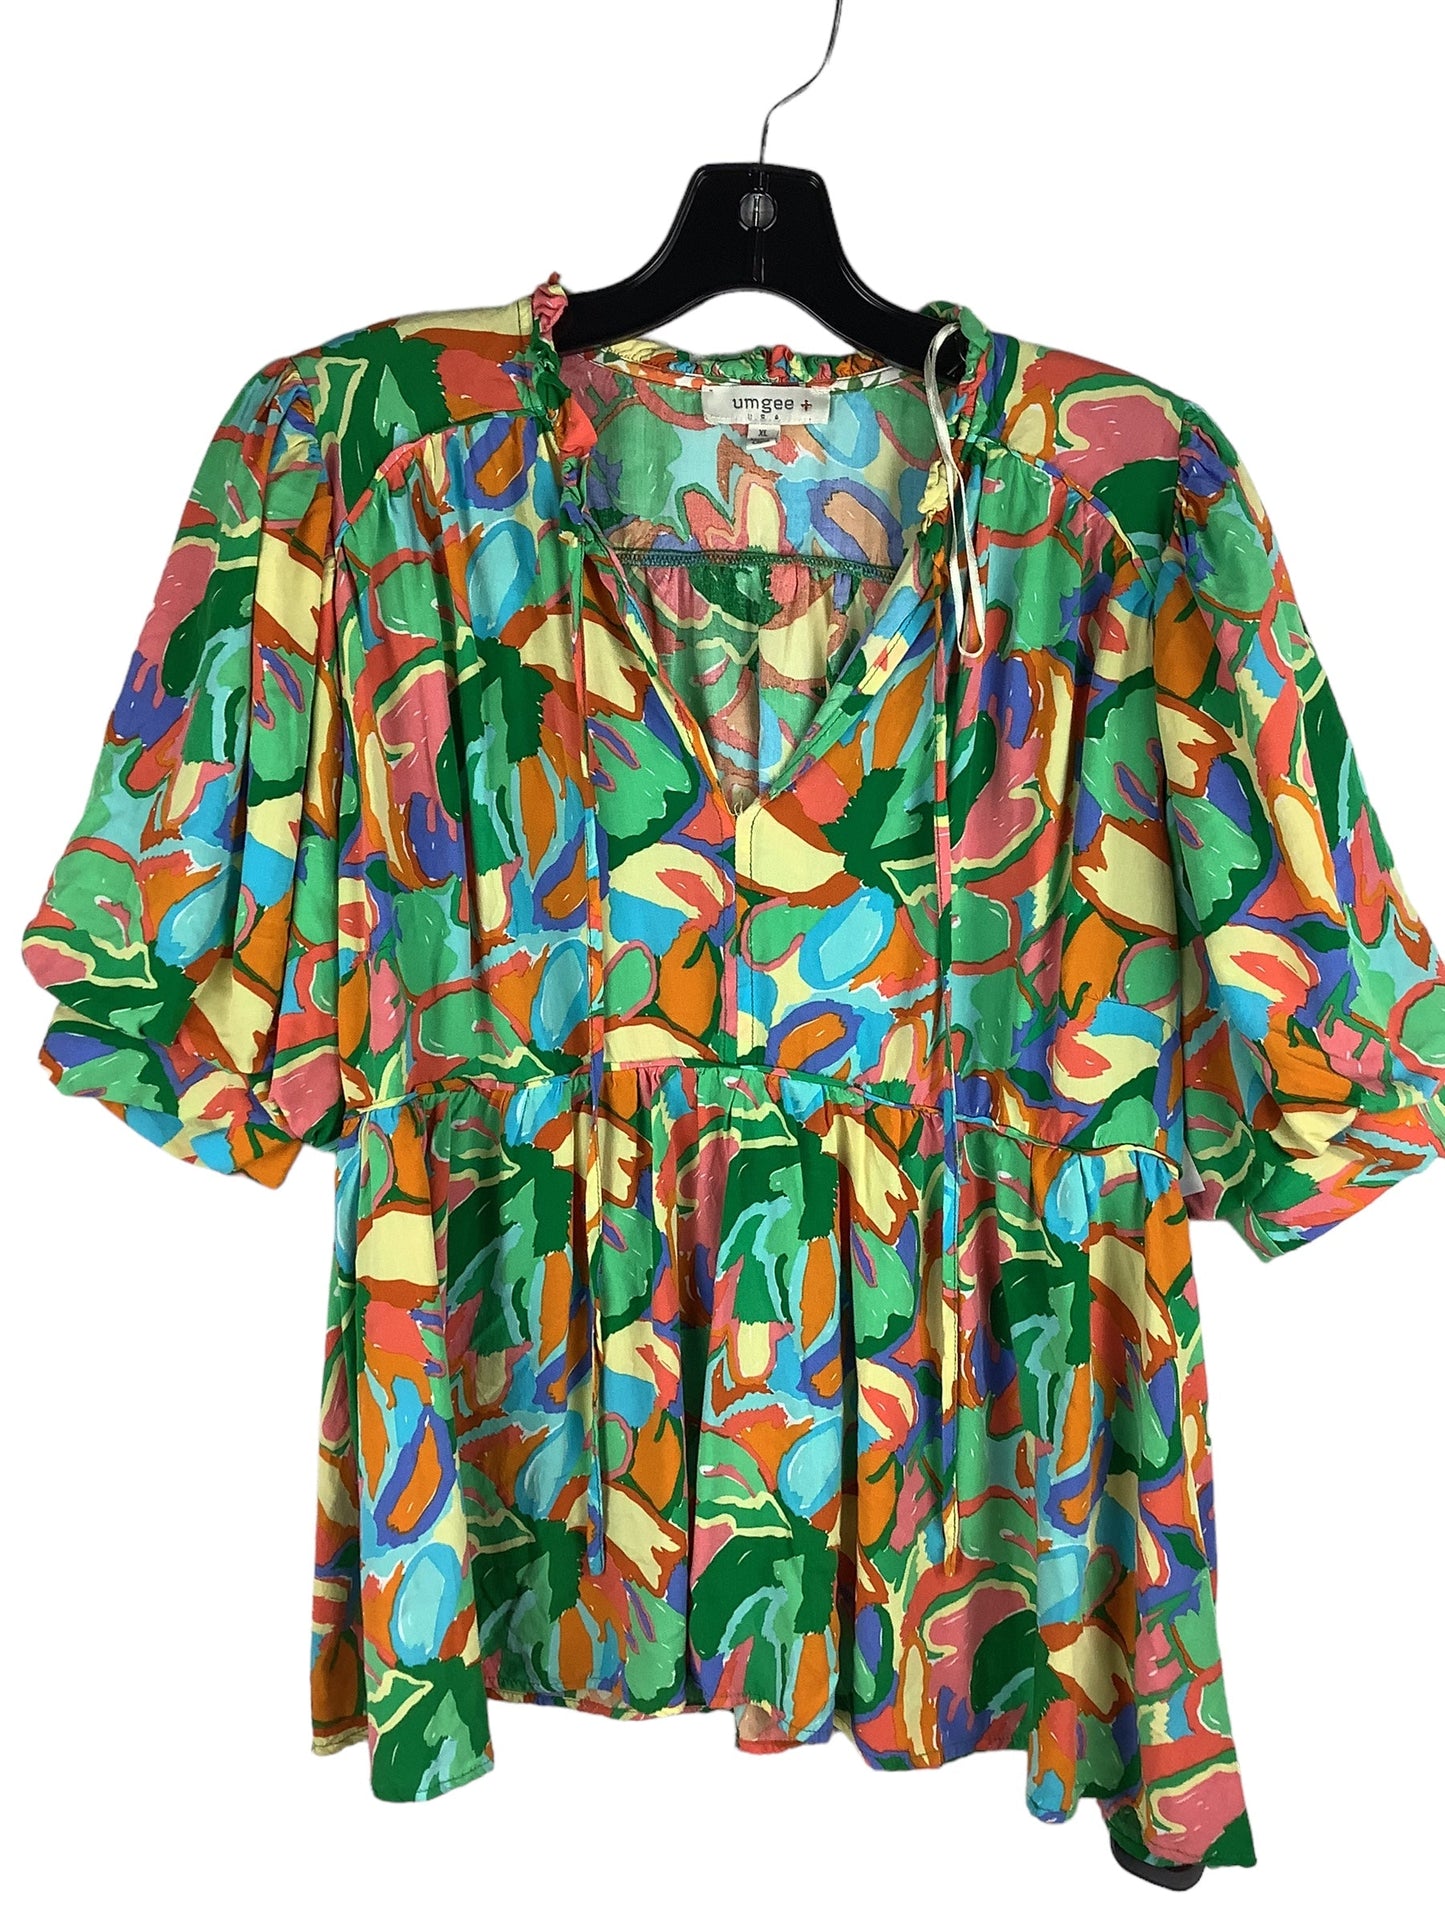 Multi-colored Top Short Sleeve Umgee, Size Xl